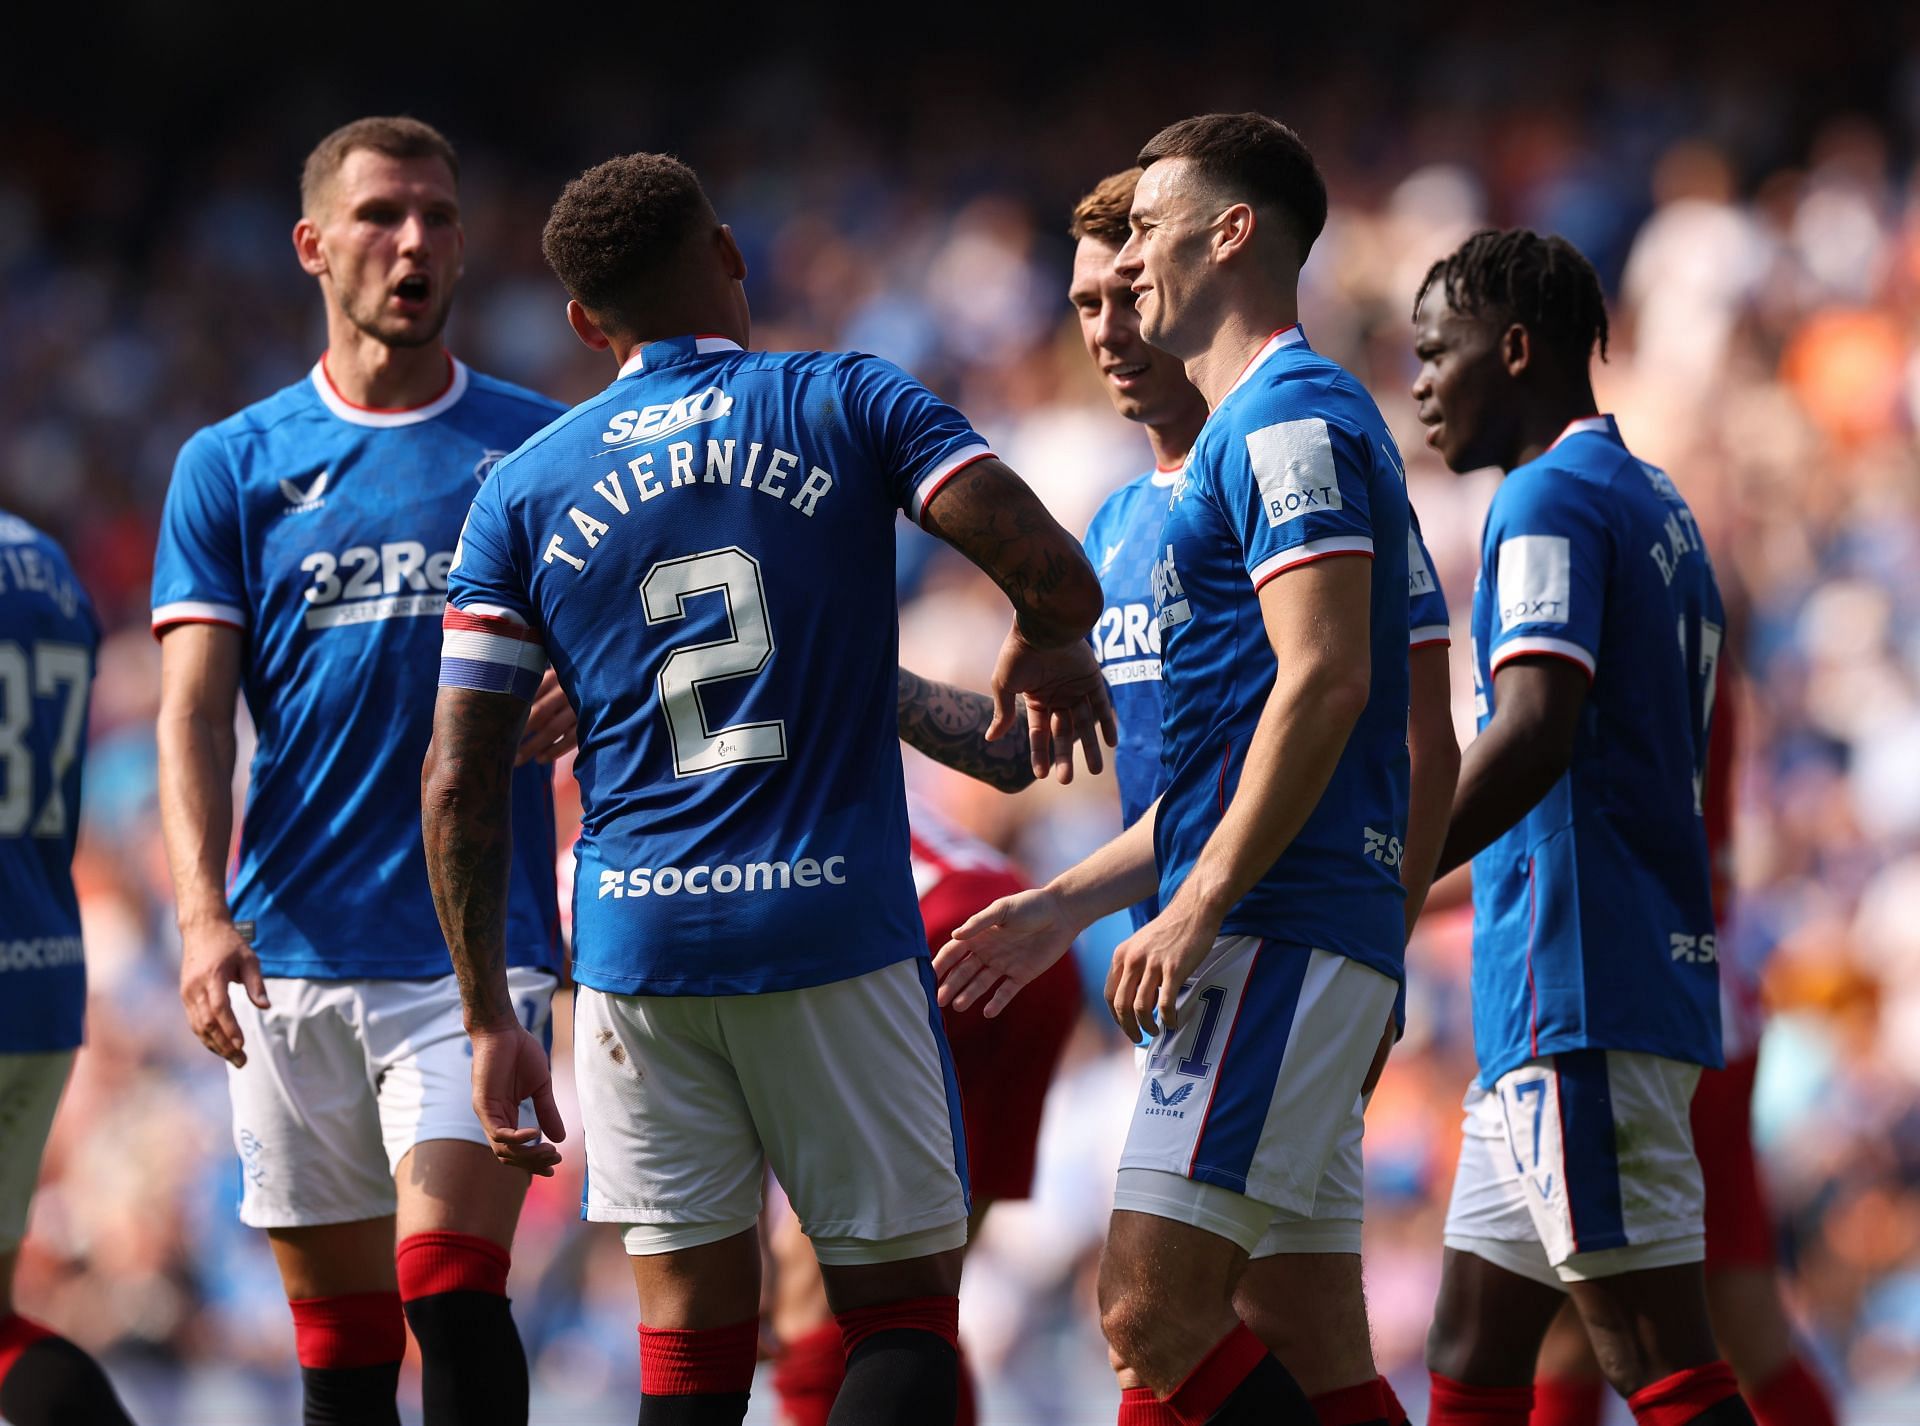 Rangers FC can smell blood this weekend with Celtic facing a tricky opponent